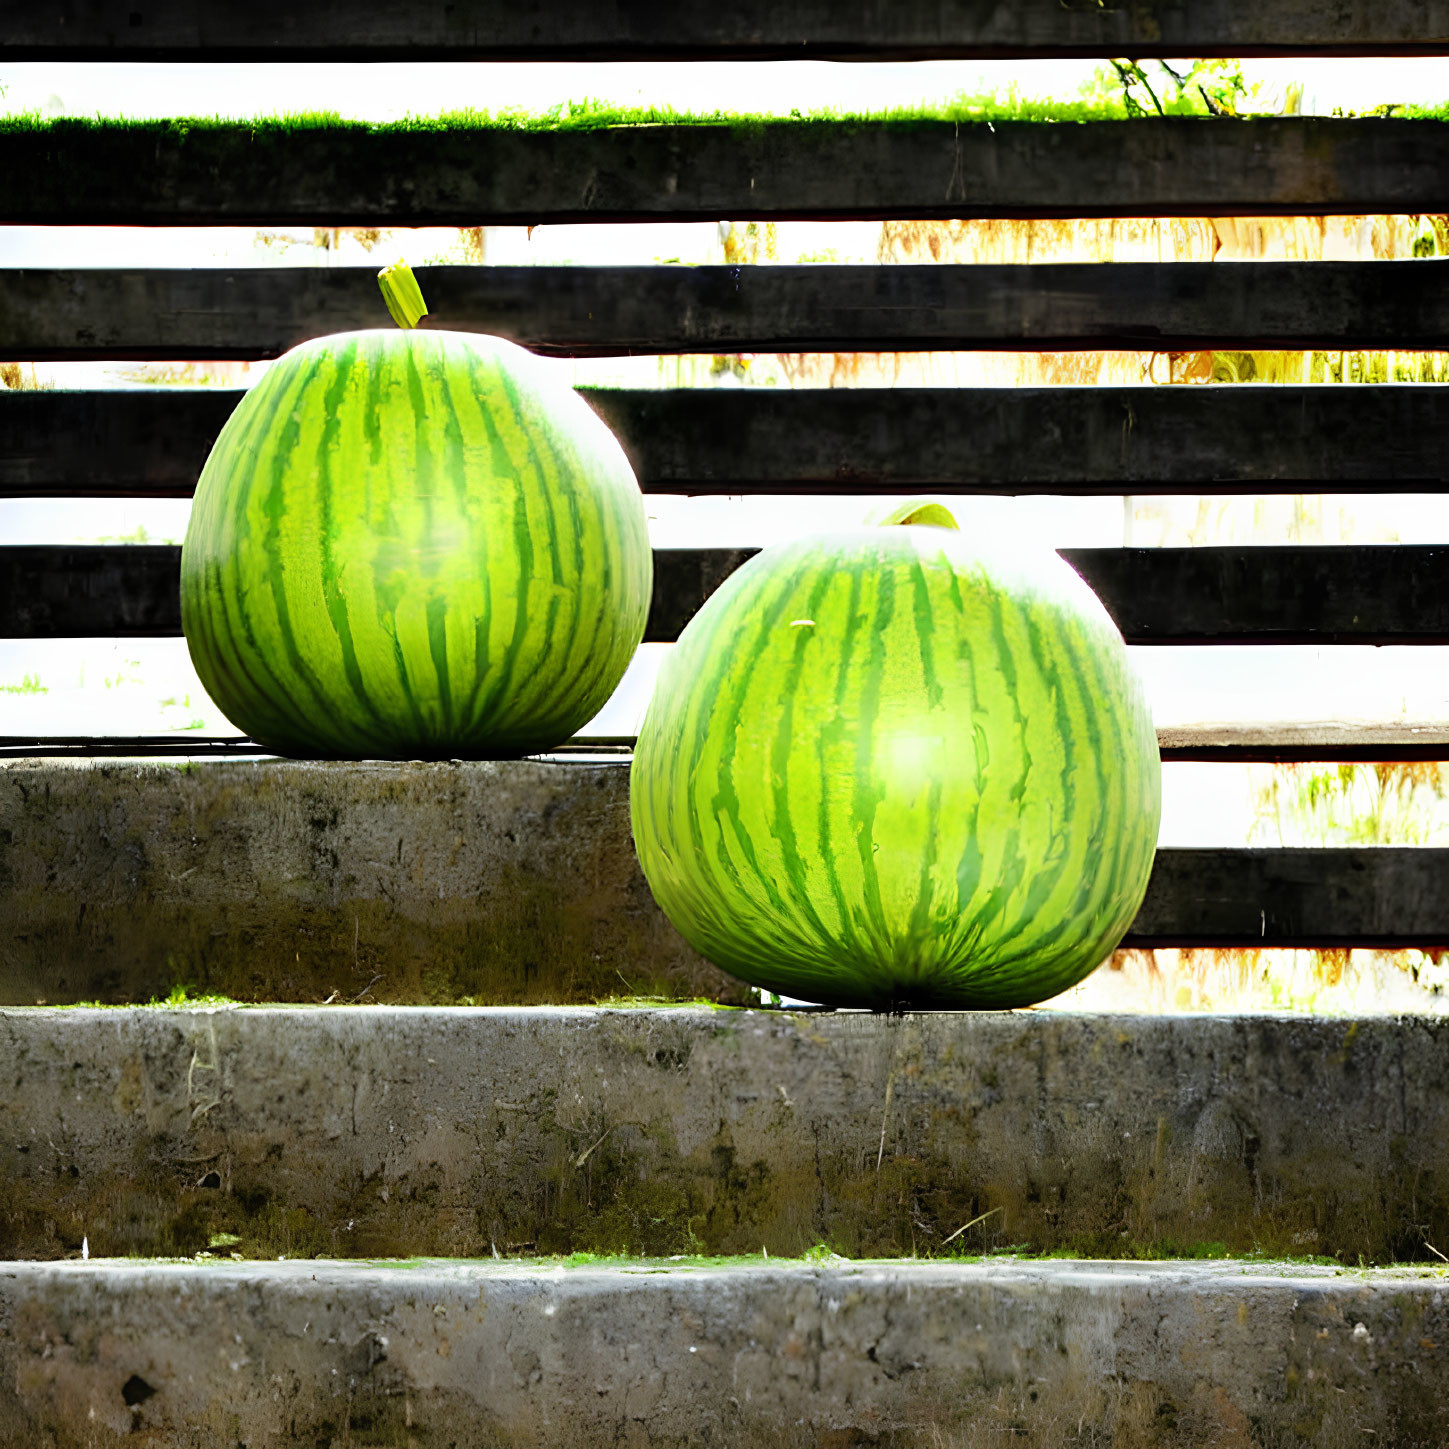 Ripe watermelons on outdoor concrete steps under sunlight.